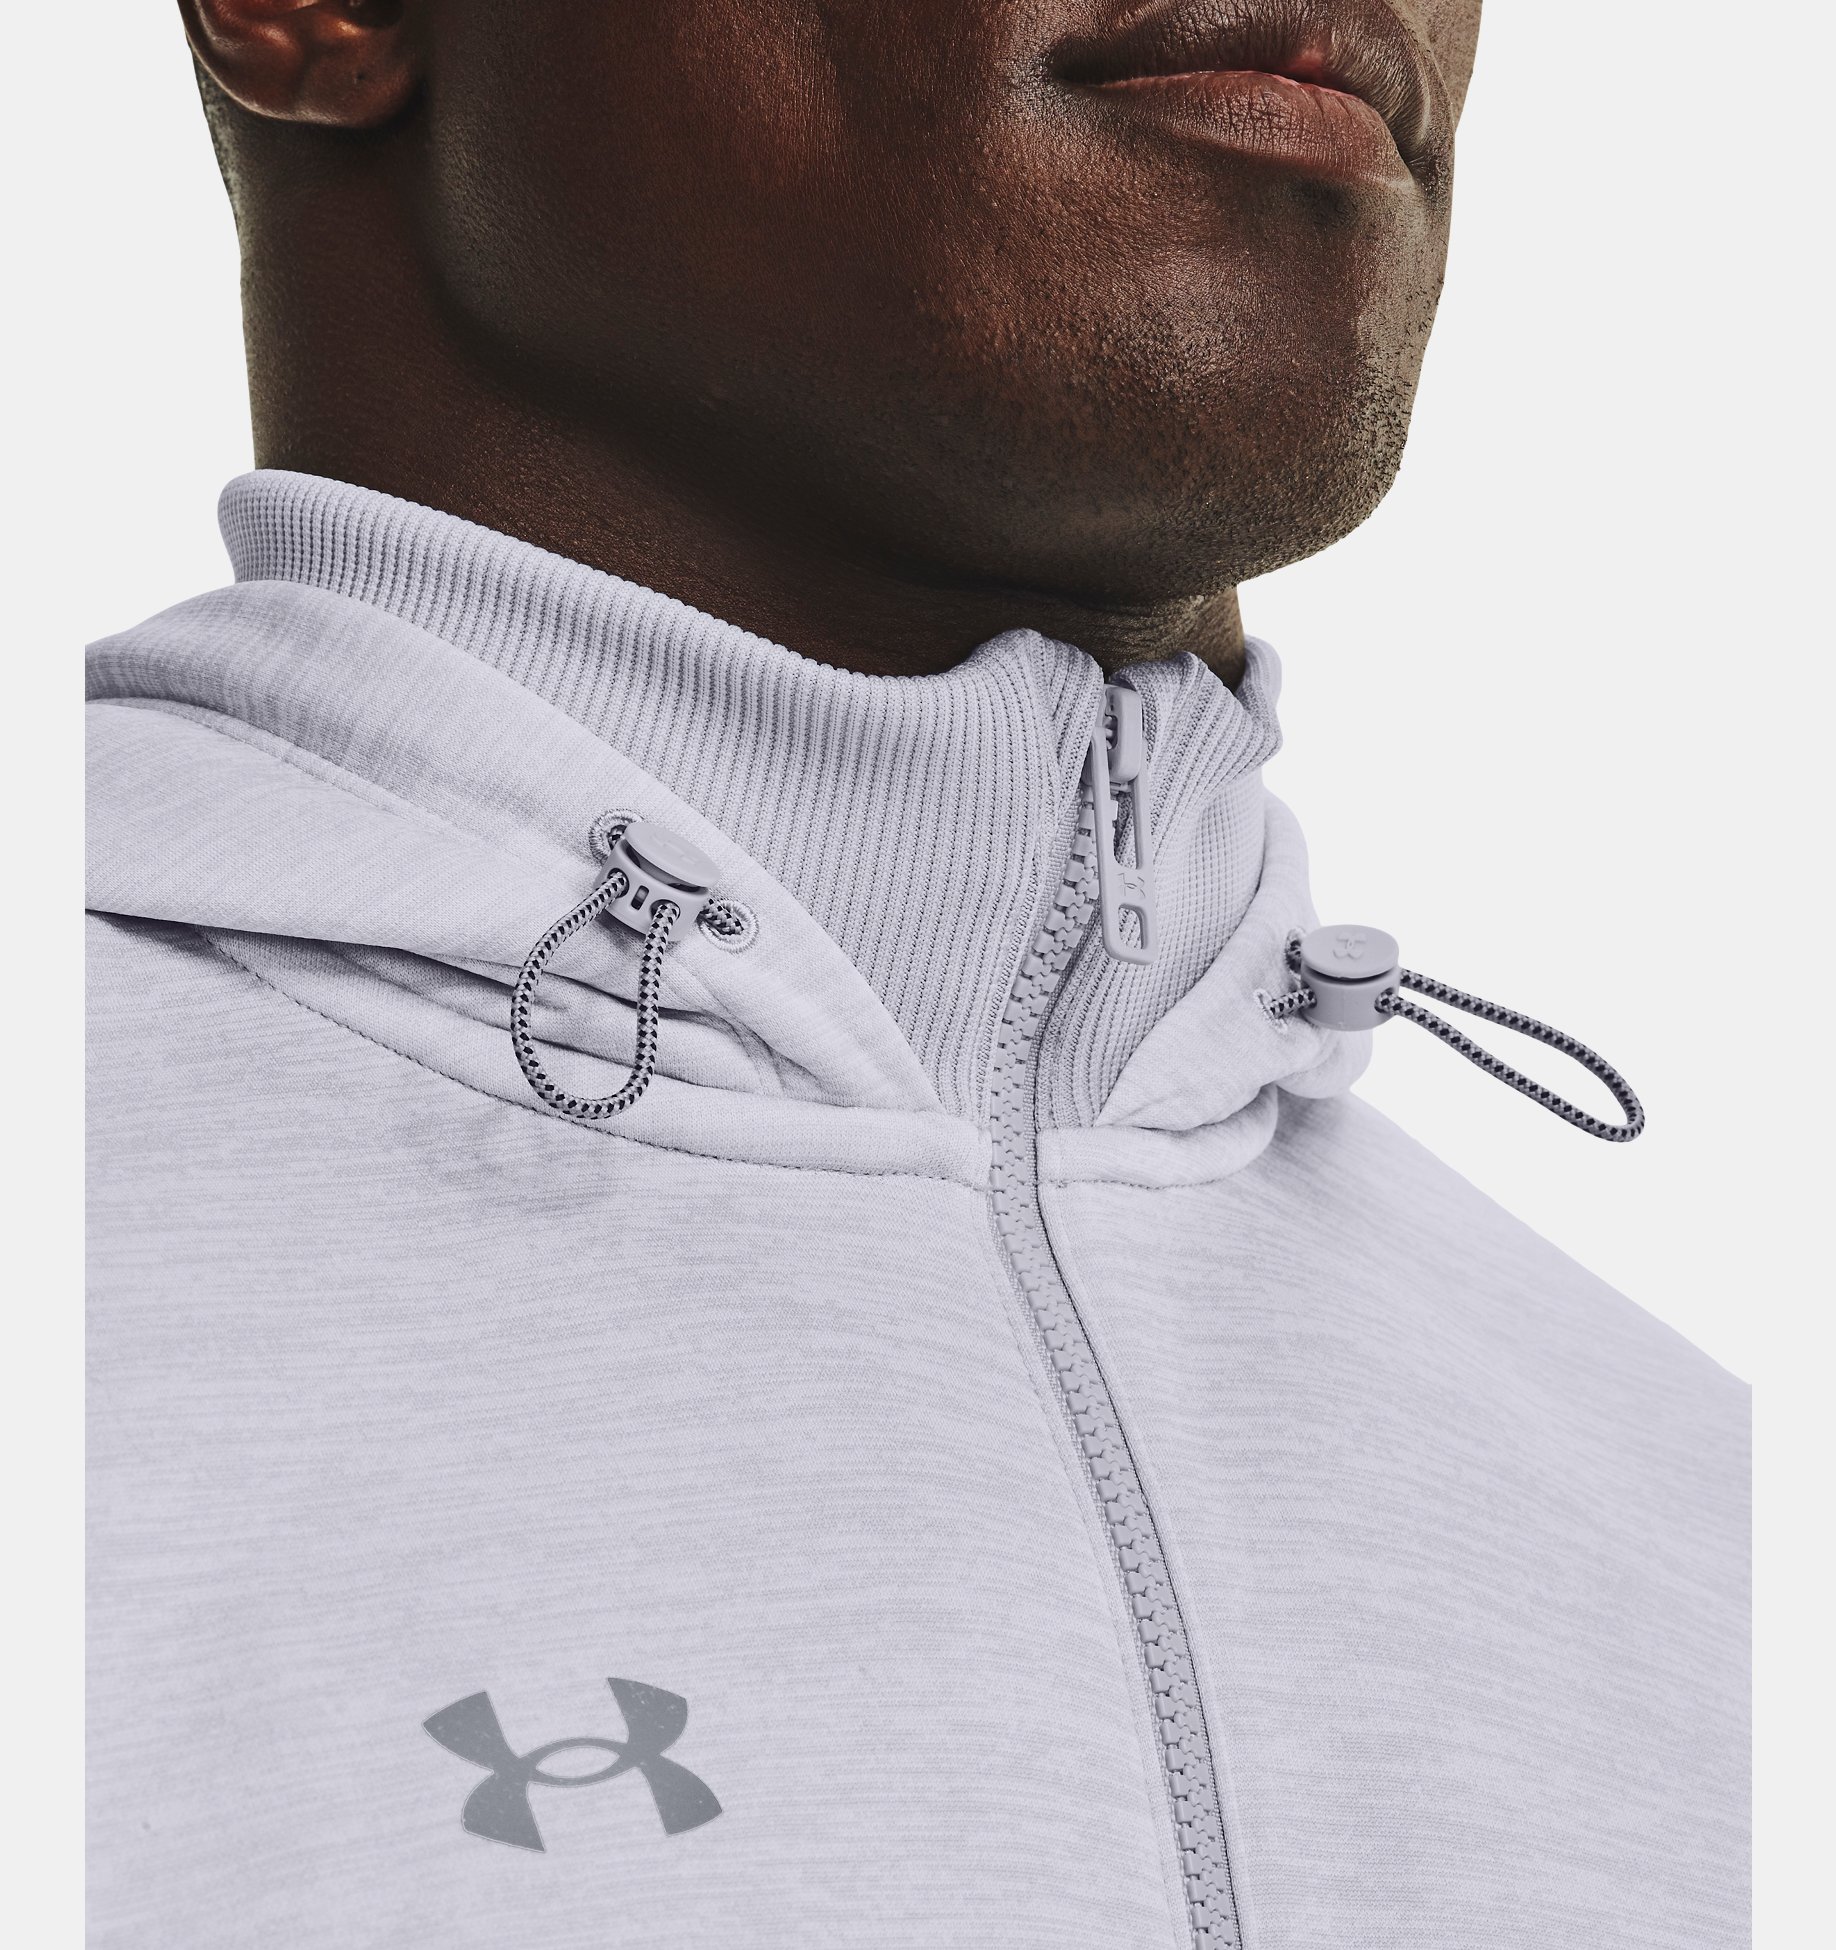 Details about   Under Armour Men's UA Storm Armour Fleece ¼ Zip Hoodie 1313504-918 Ink Small NWT 